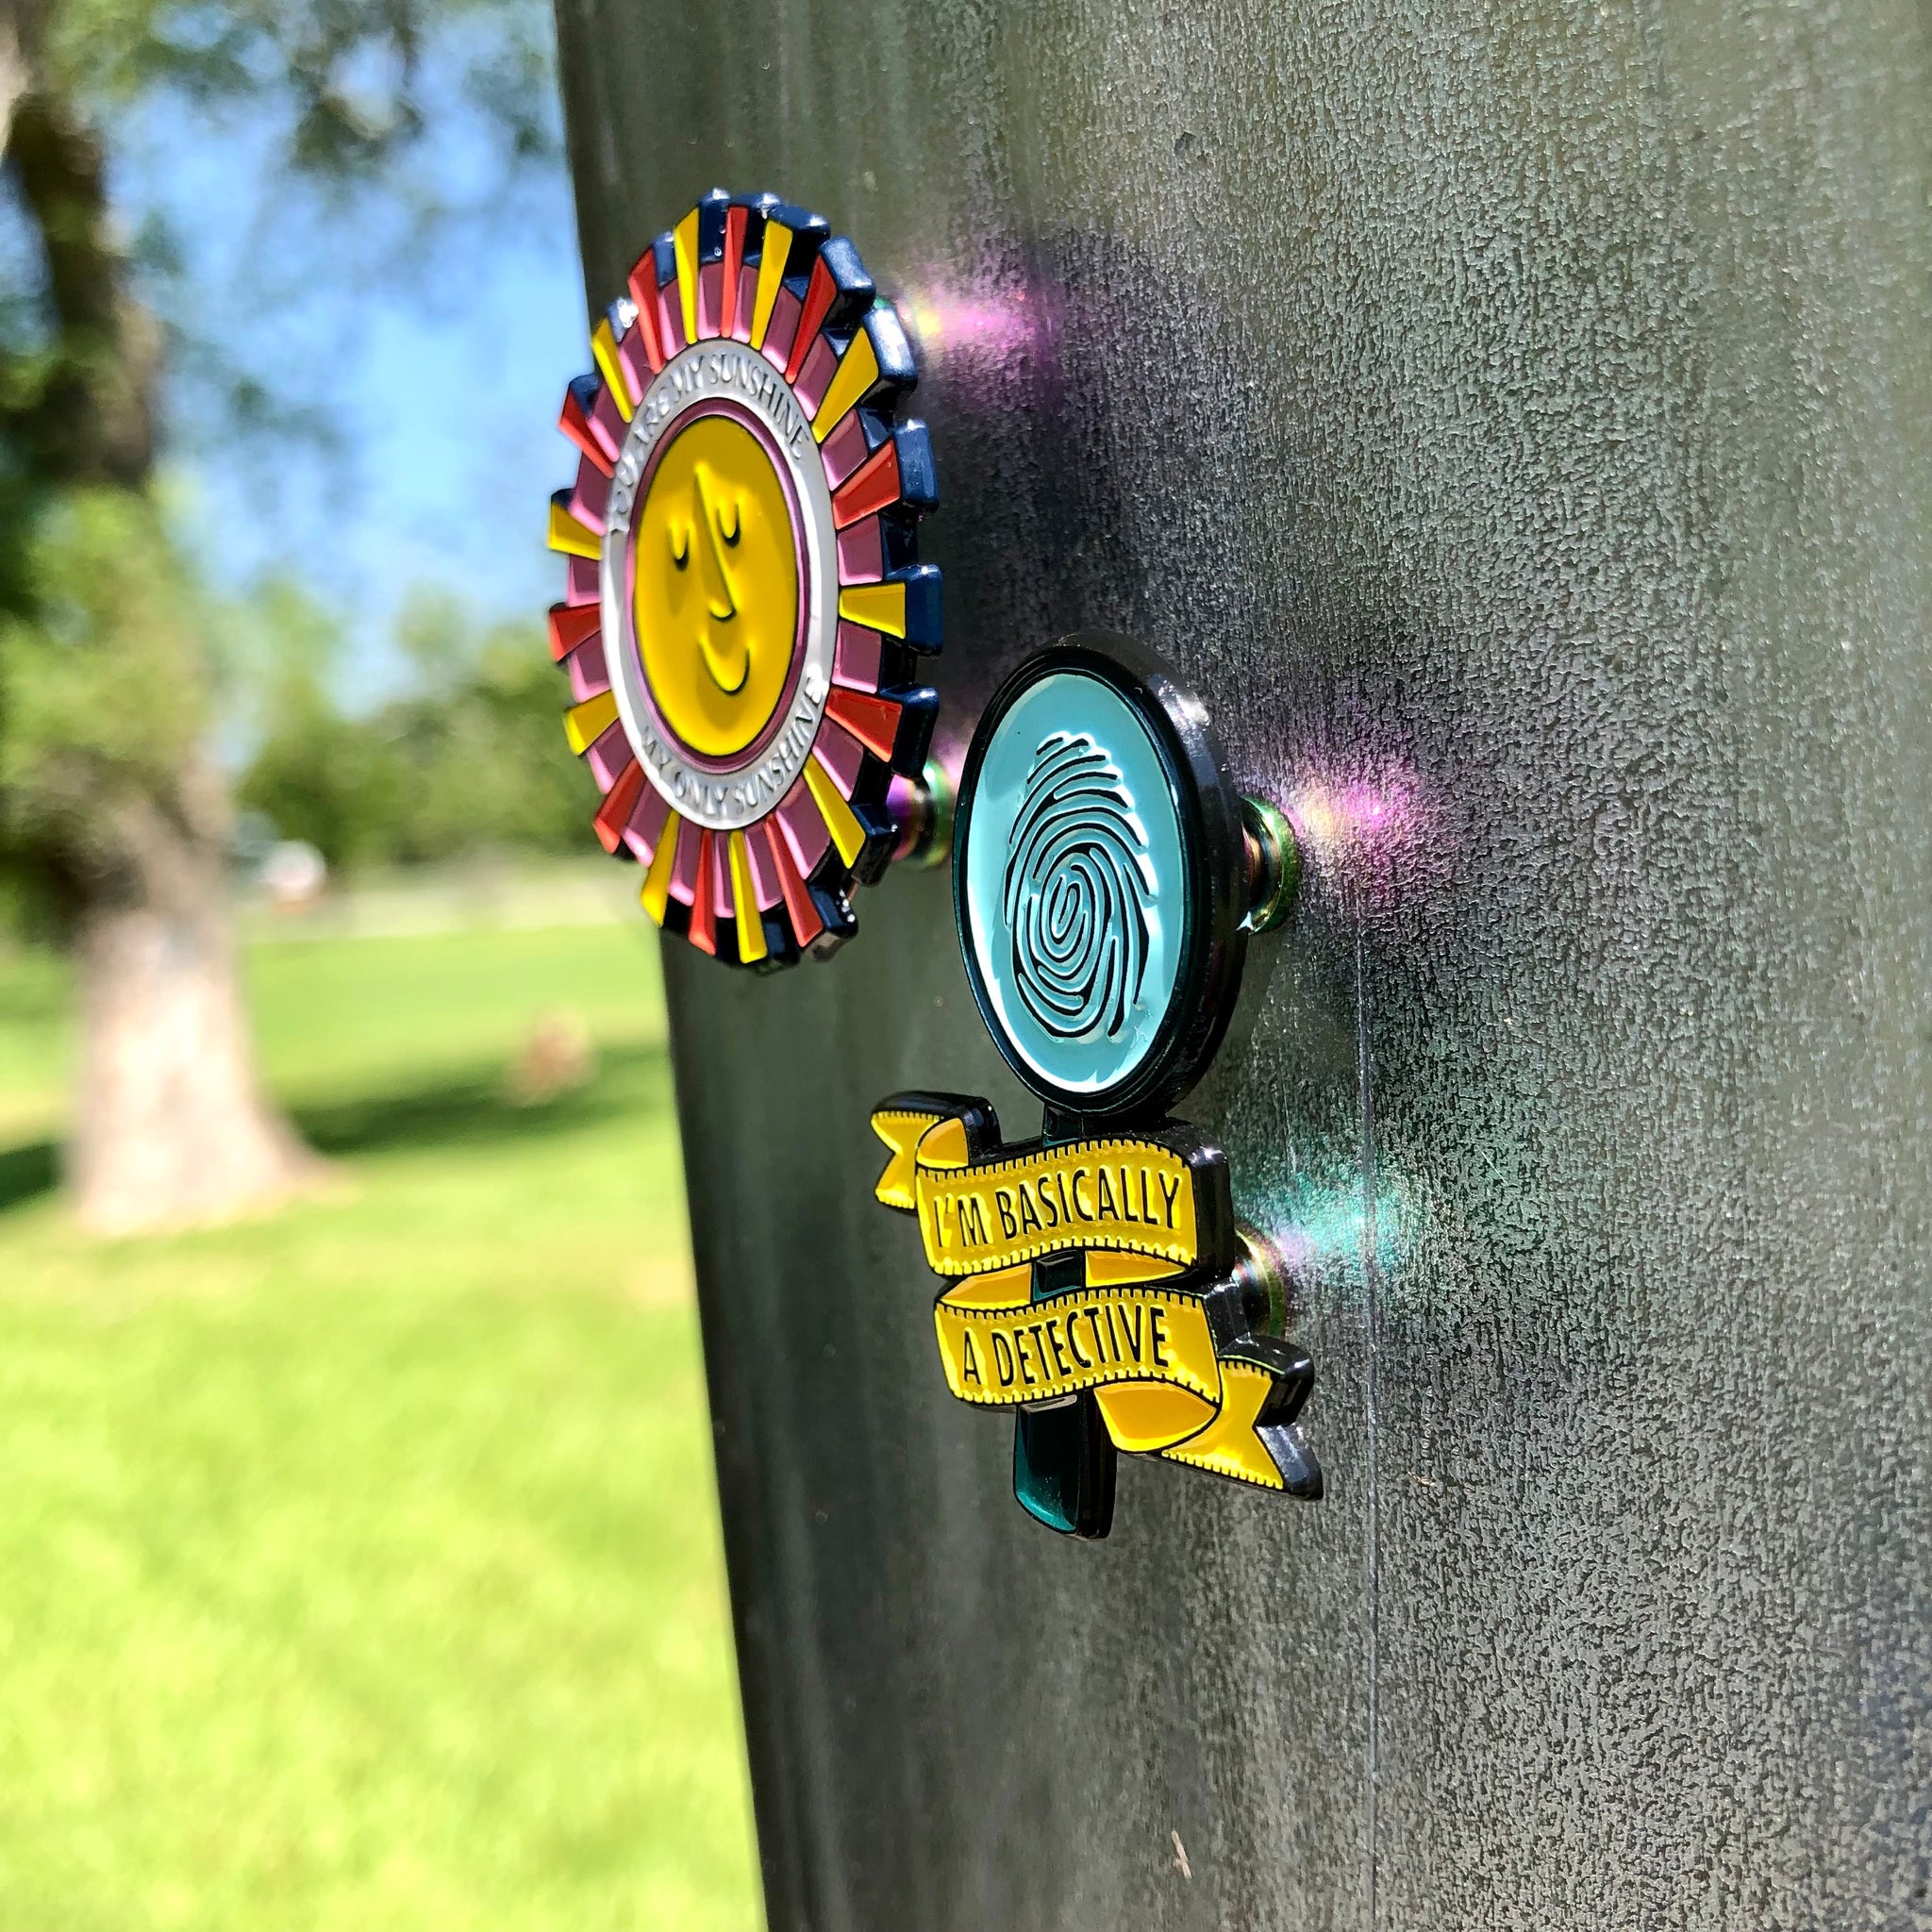 Magnetic Pin Backs With Slip-resistant Backing Convert Enamel Pins